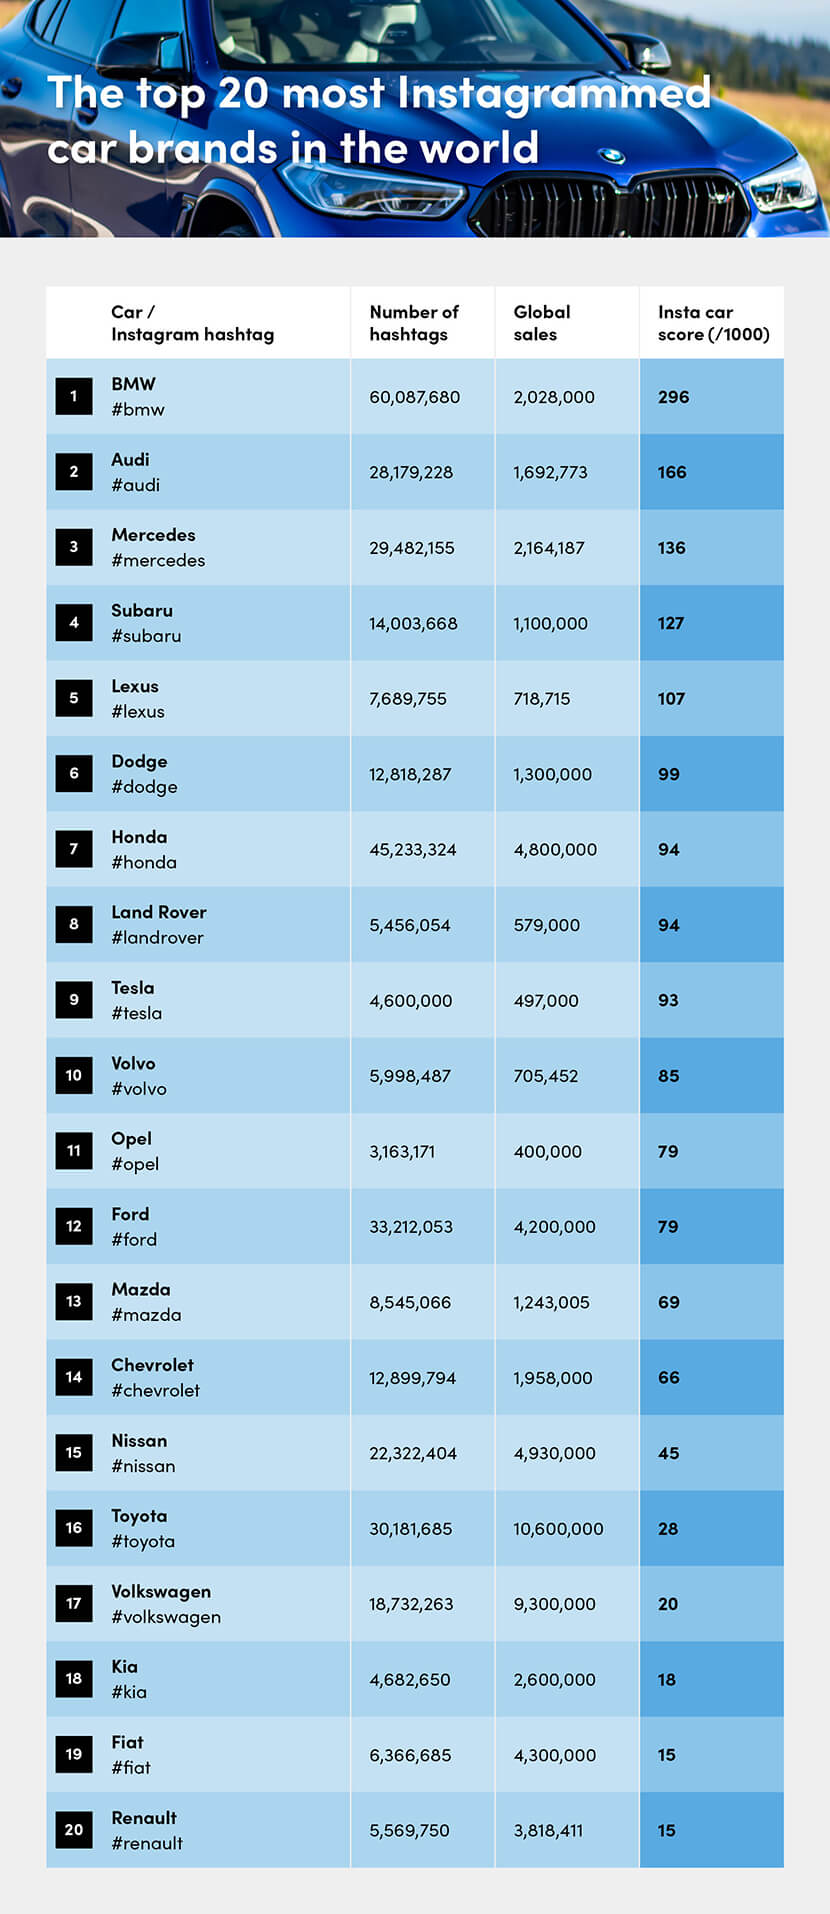 Table showing the top 20 most Instagrammed car brands in the world